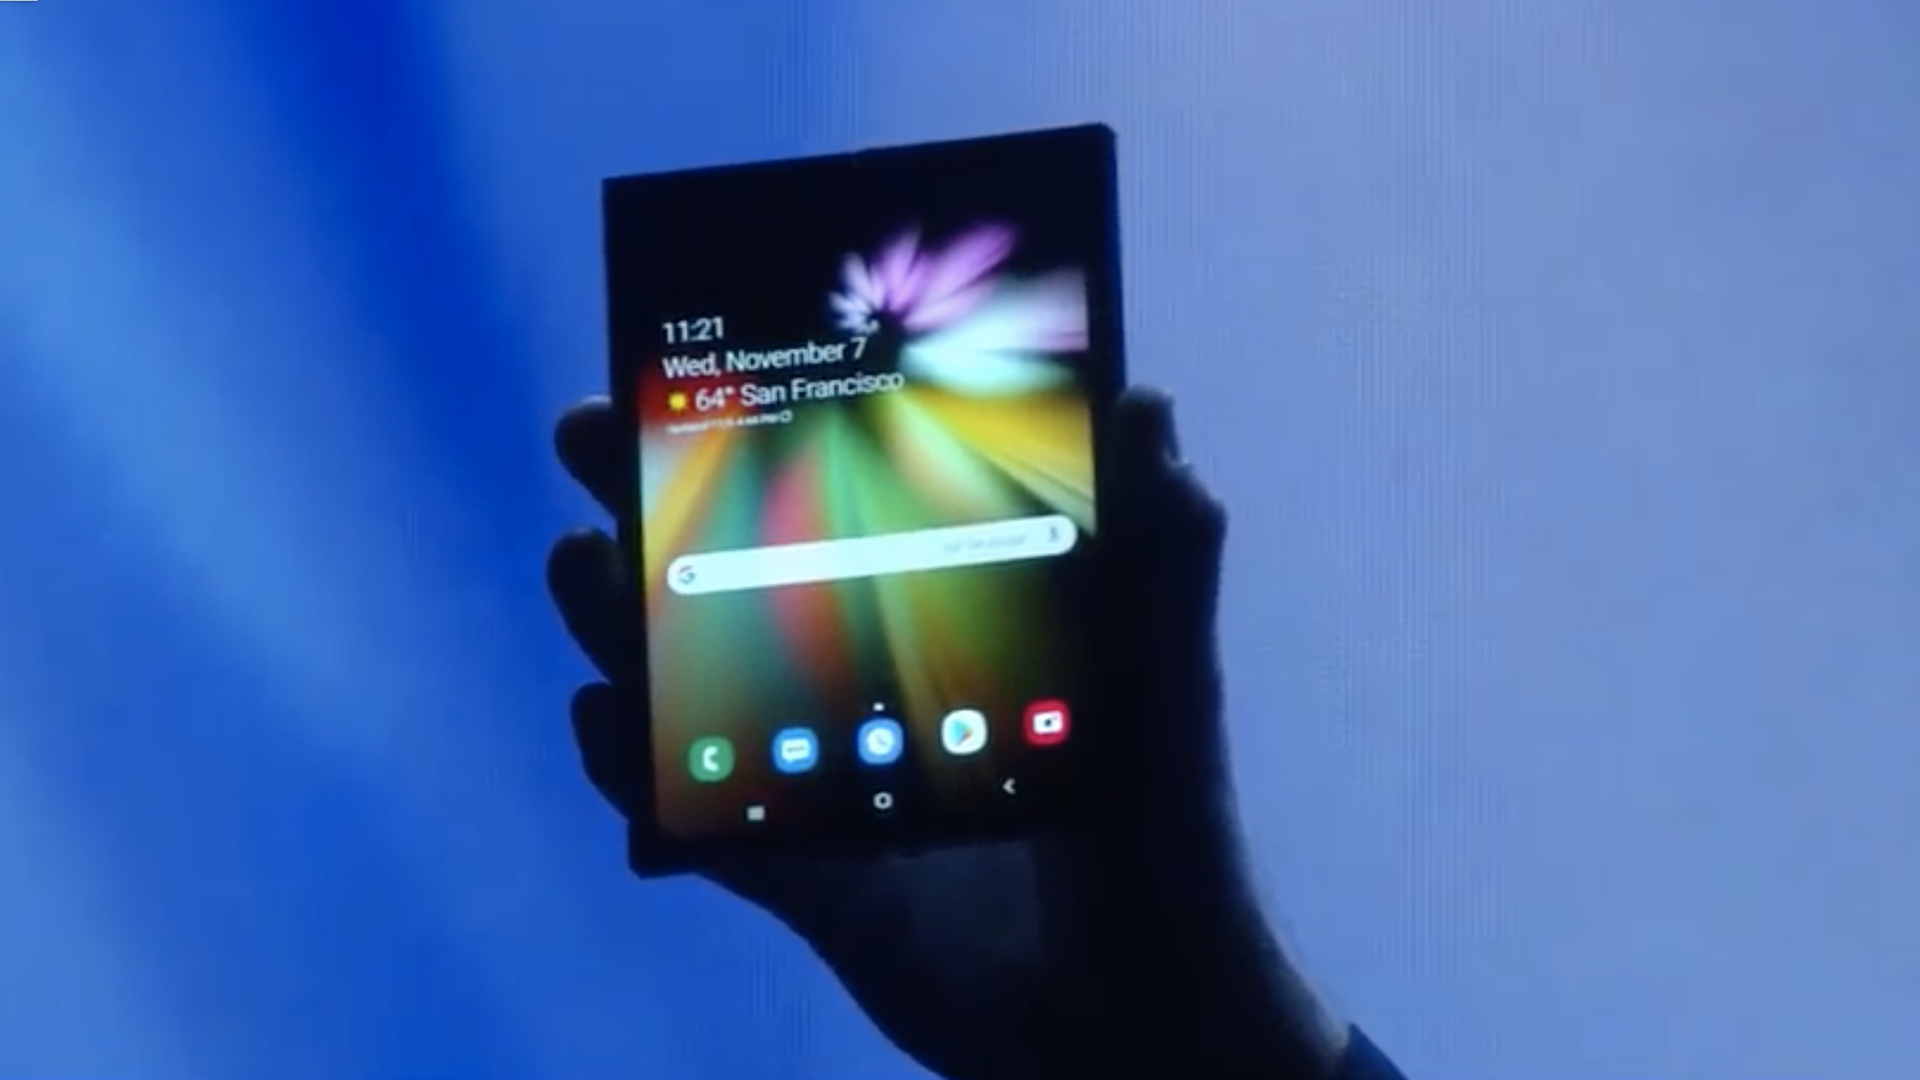 Samsung teased a foldable smartphone at a 2018 developer conference. Photo: Samsung